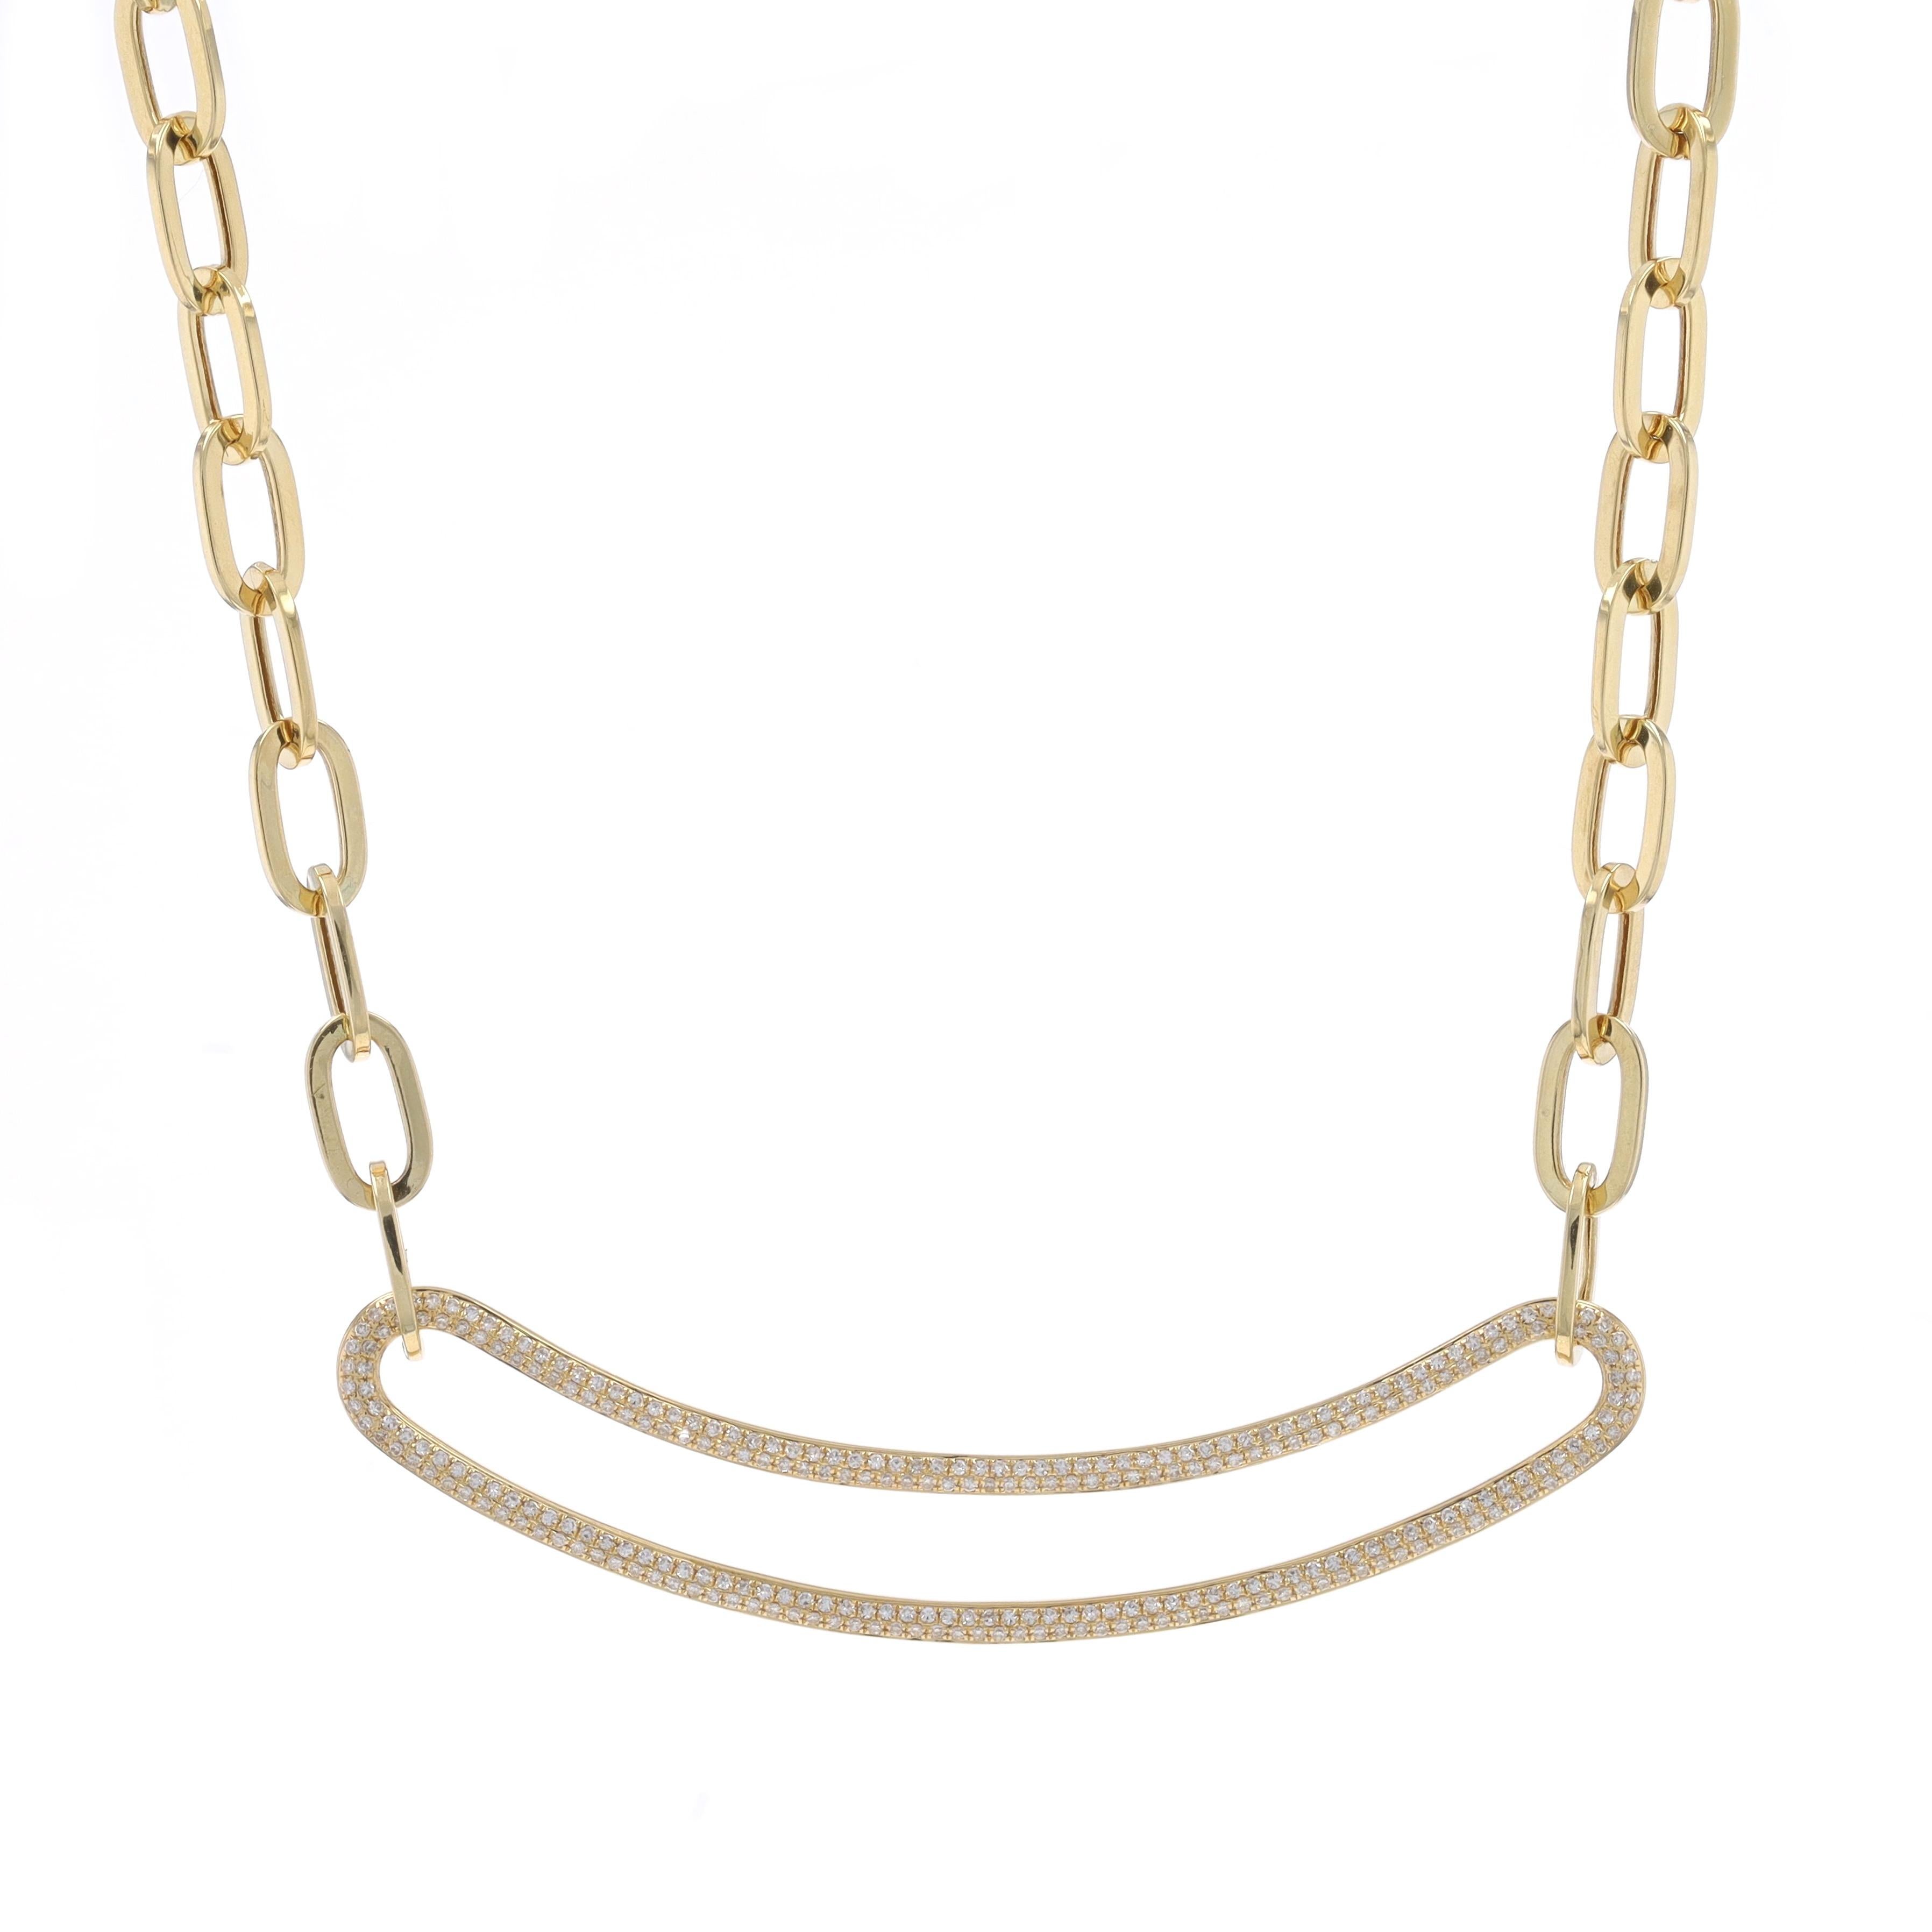 Metal Content: 14k Yellow Gold

Stone Information

Natural Diamonds
Carat(s): .62ctw
Cut: Single
Color: F - G
Clarity: VS1 - VS2

Total Carats: 0.62ctw

Style: Curved Bar
Chain Style: Paperclip
Necklace Style: Chain
Fastening Type: Snap Lock